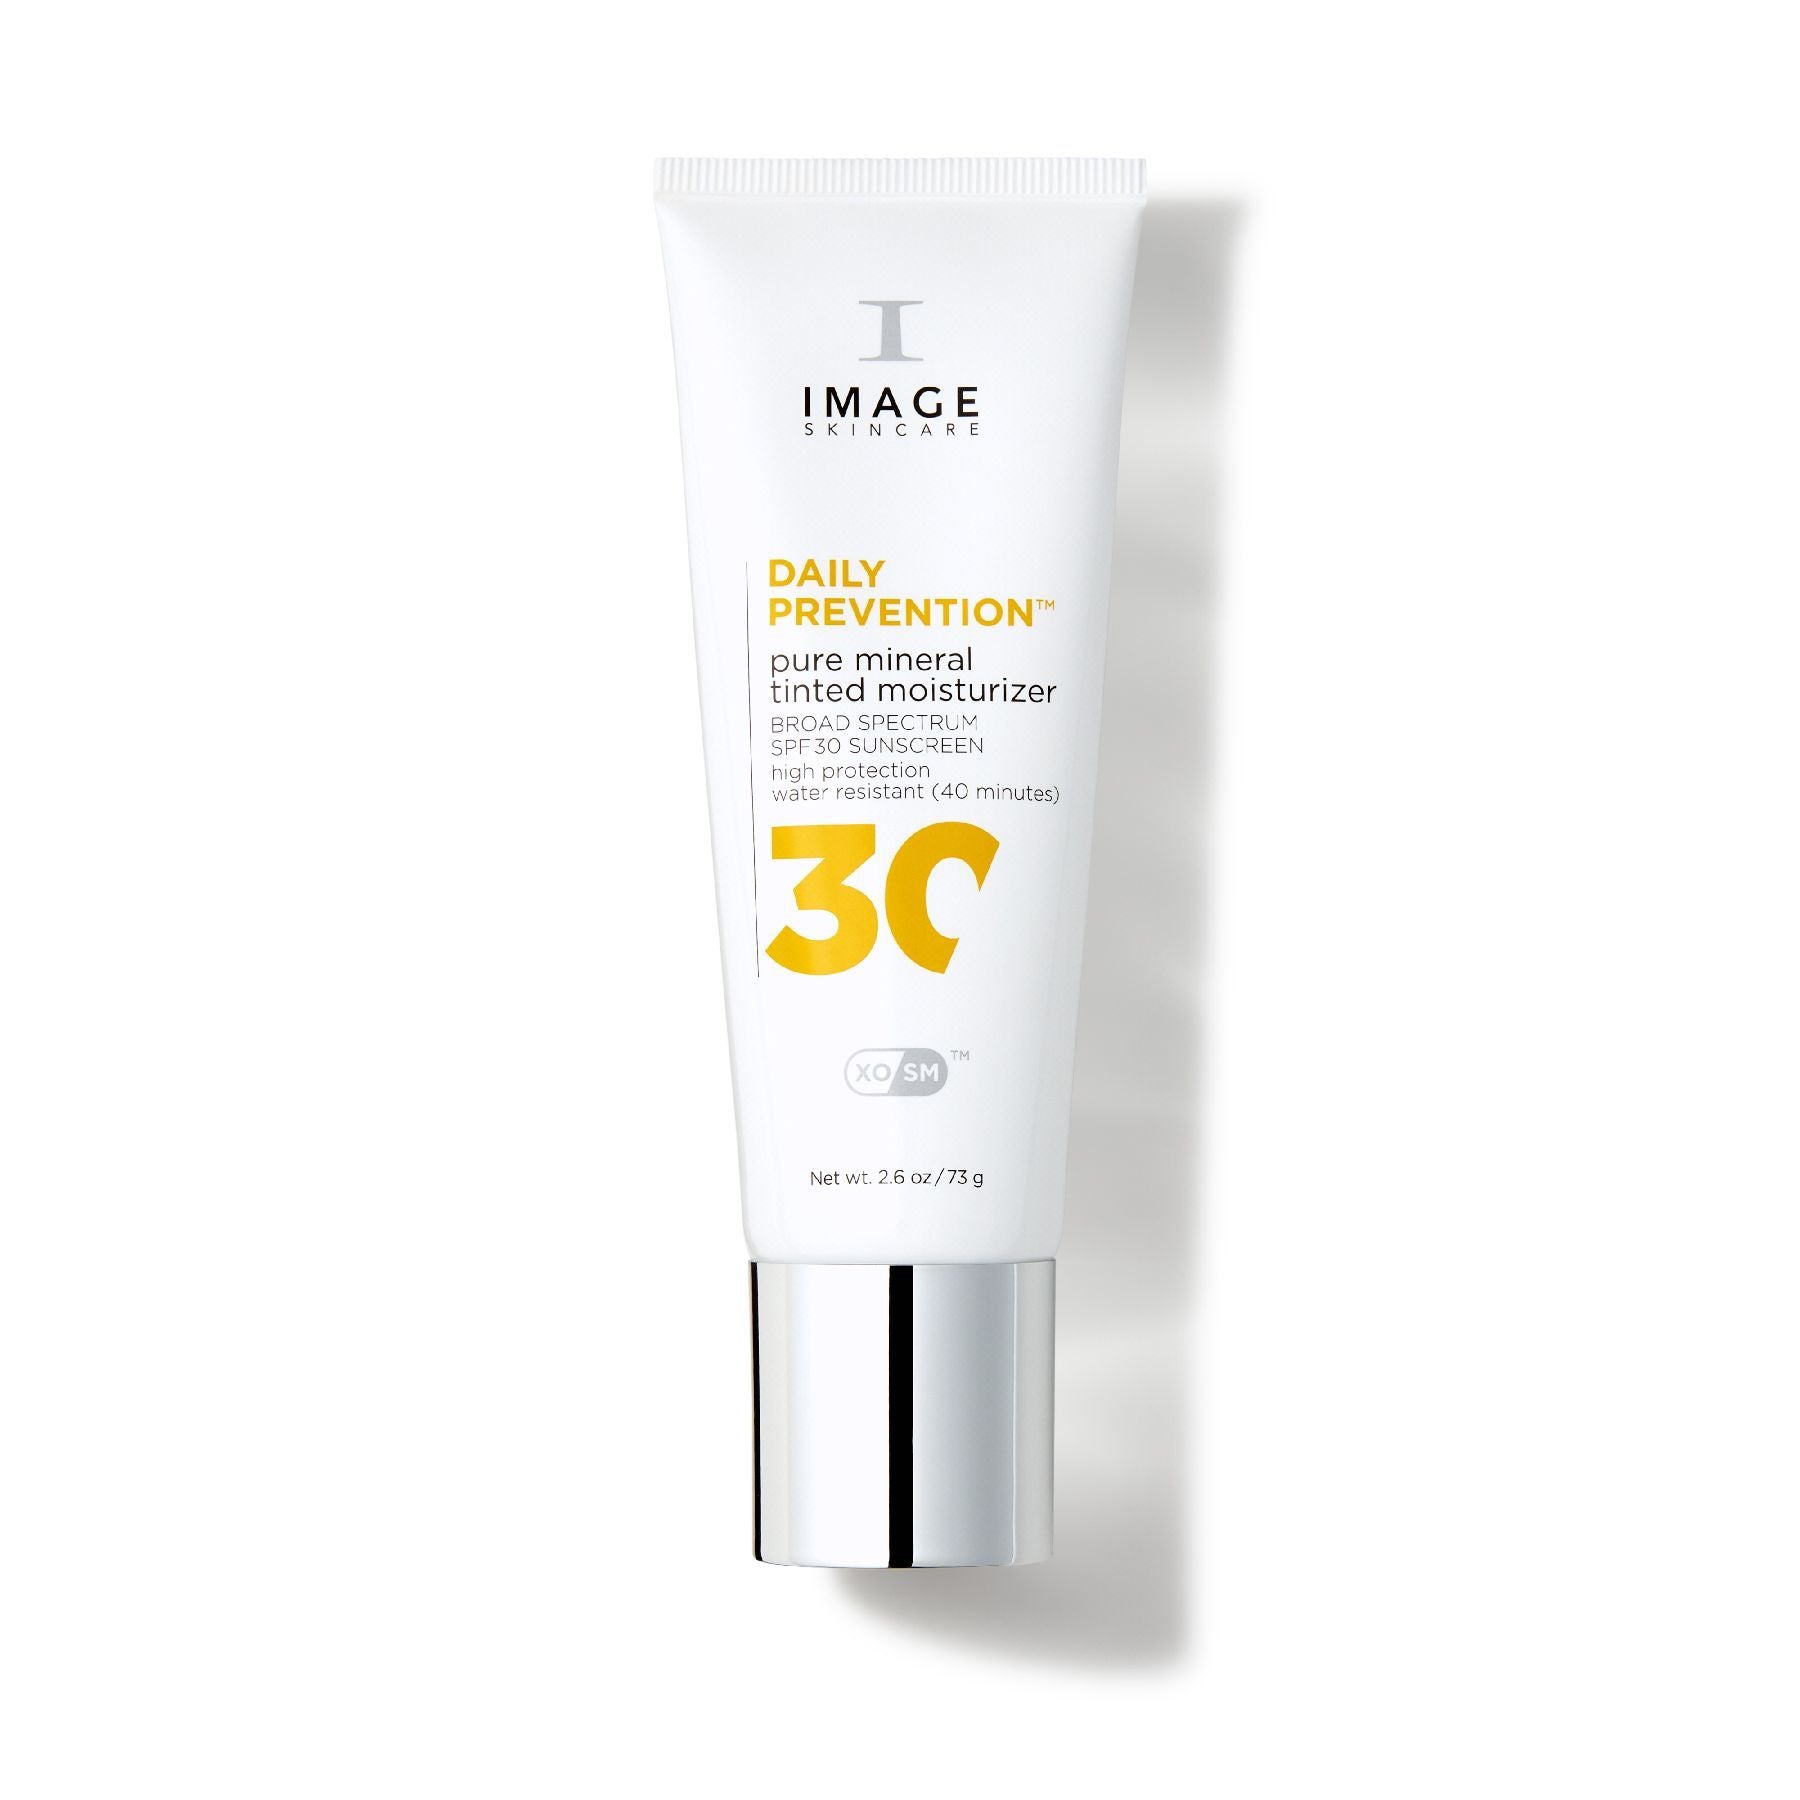 IMAGE SKINCARE DAILY PREVENTION Pure Mineral Tinted Moisturizer SPF 30